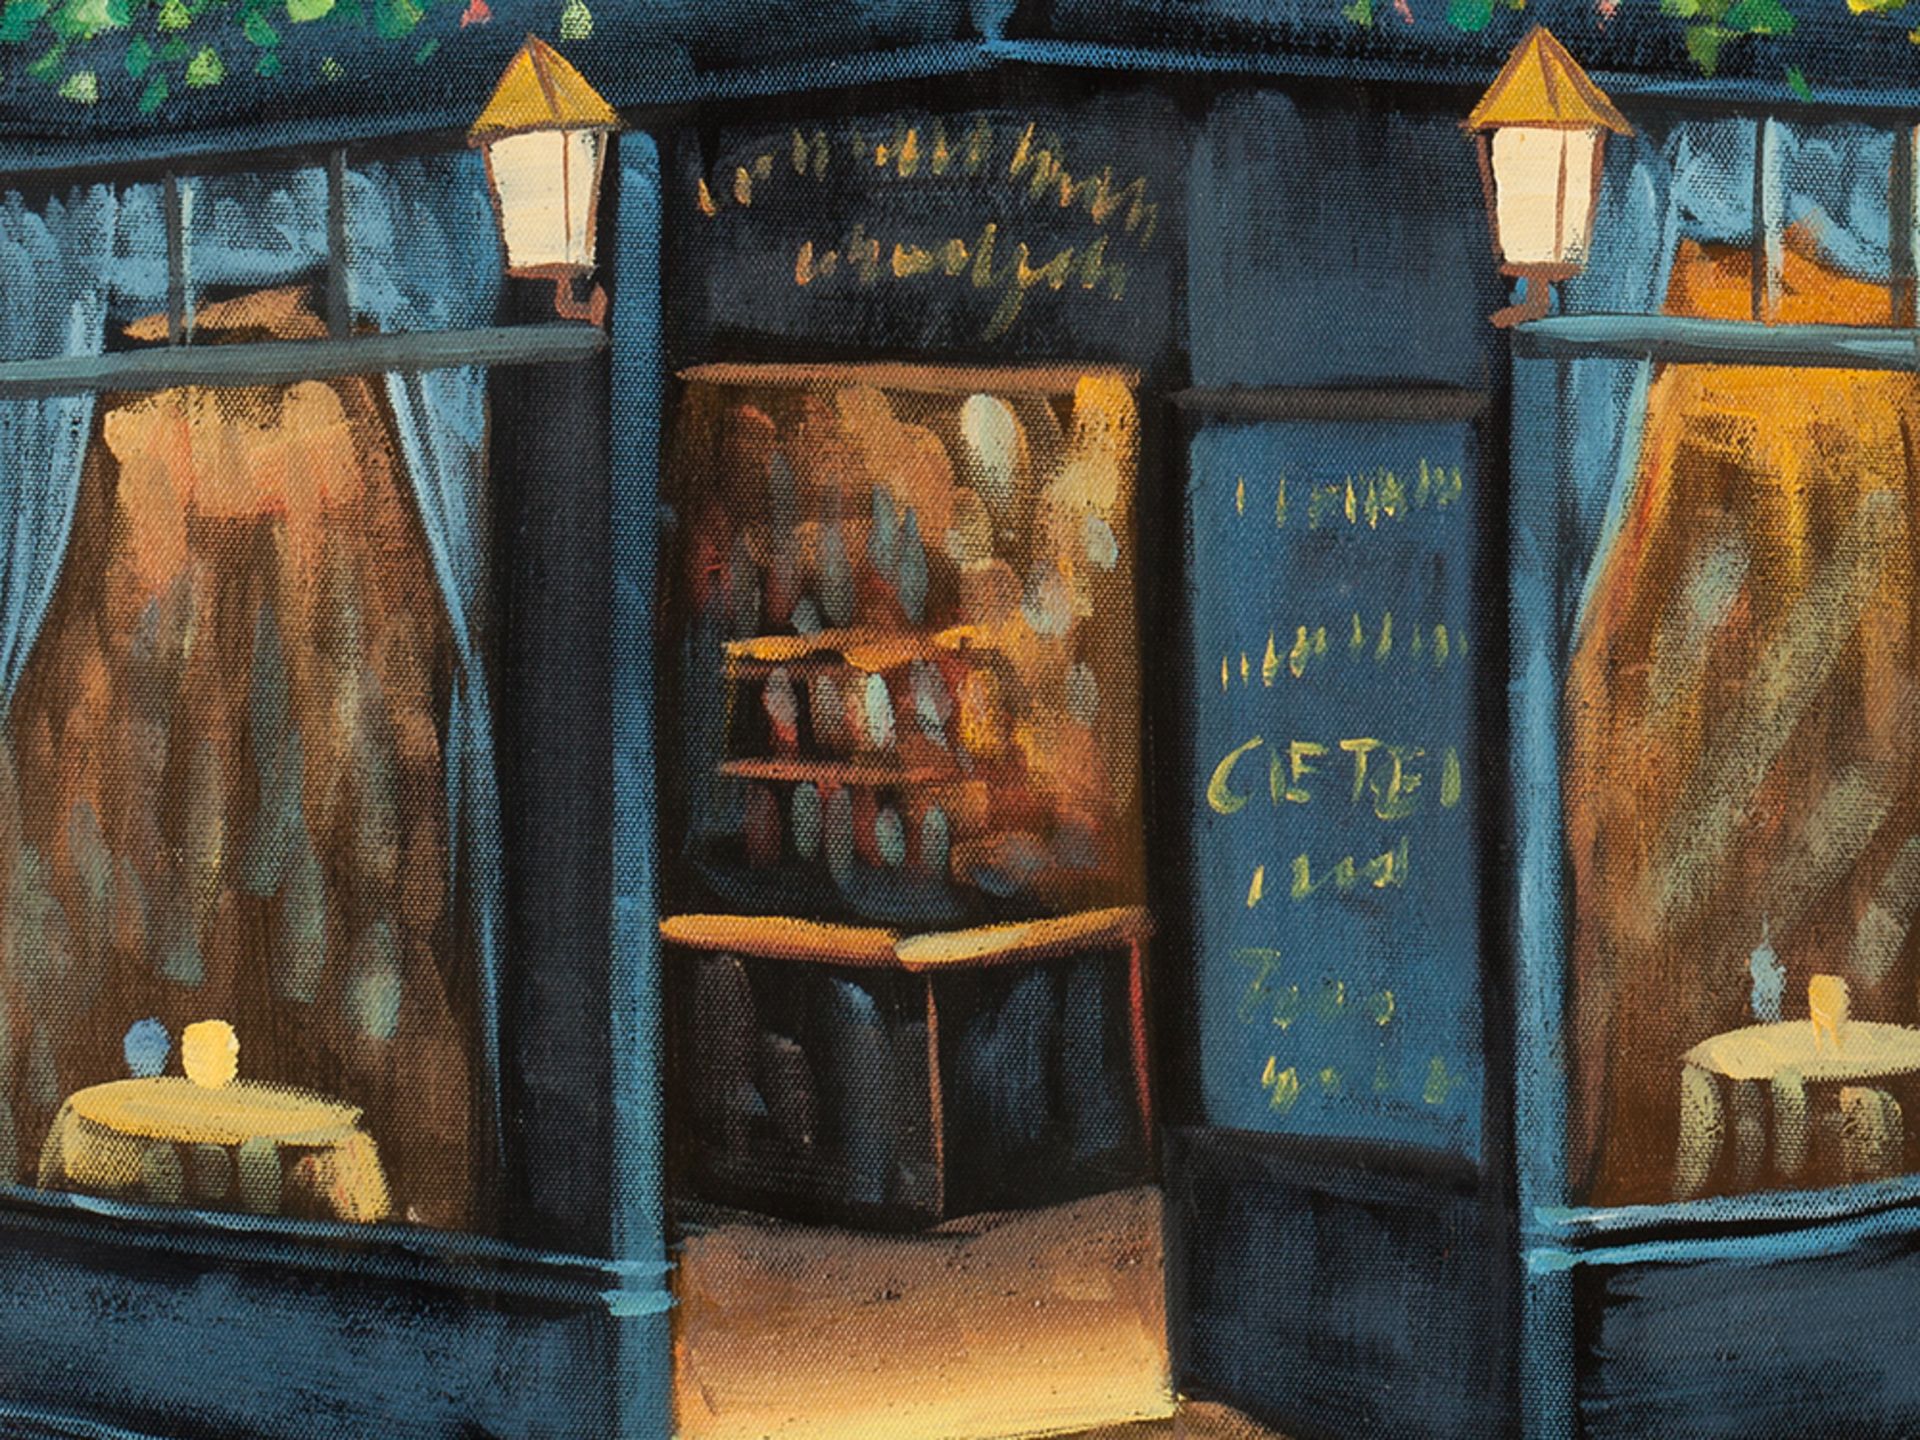 A. Wood, Oil Painting, Sidewalk Cafe, England, c. 2000 - Image 5 of 7